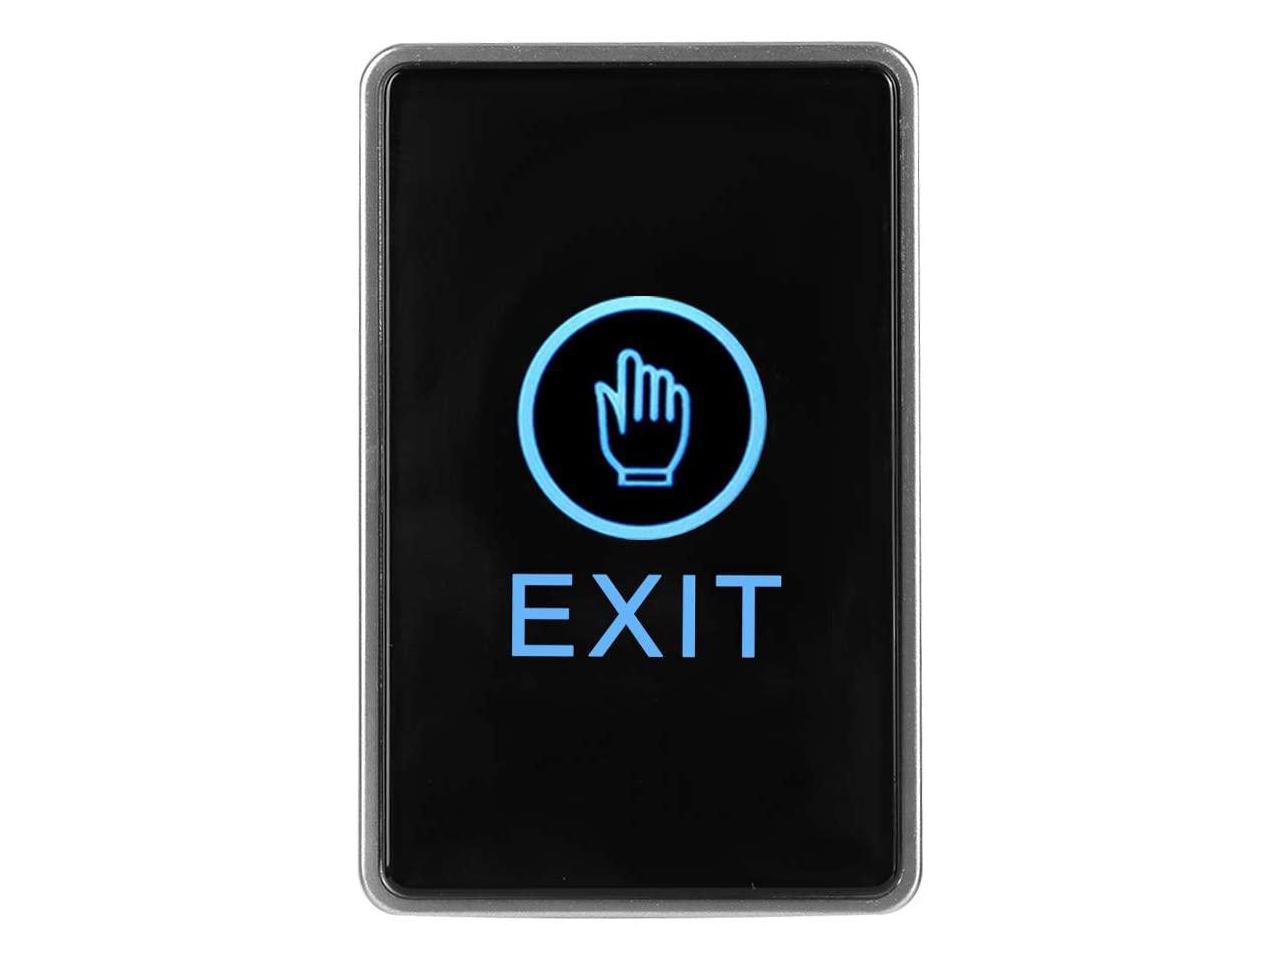 Inductive Exit Release Button Switch Sensor Home Access Control w/ LED Indicator 